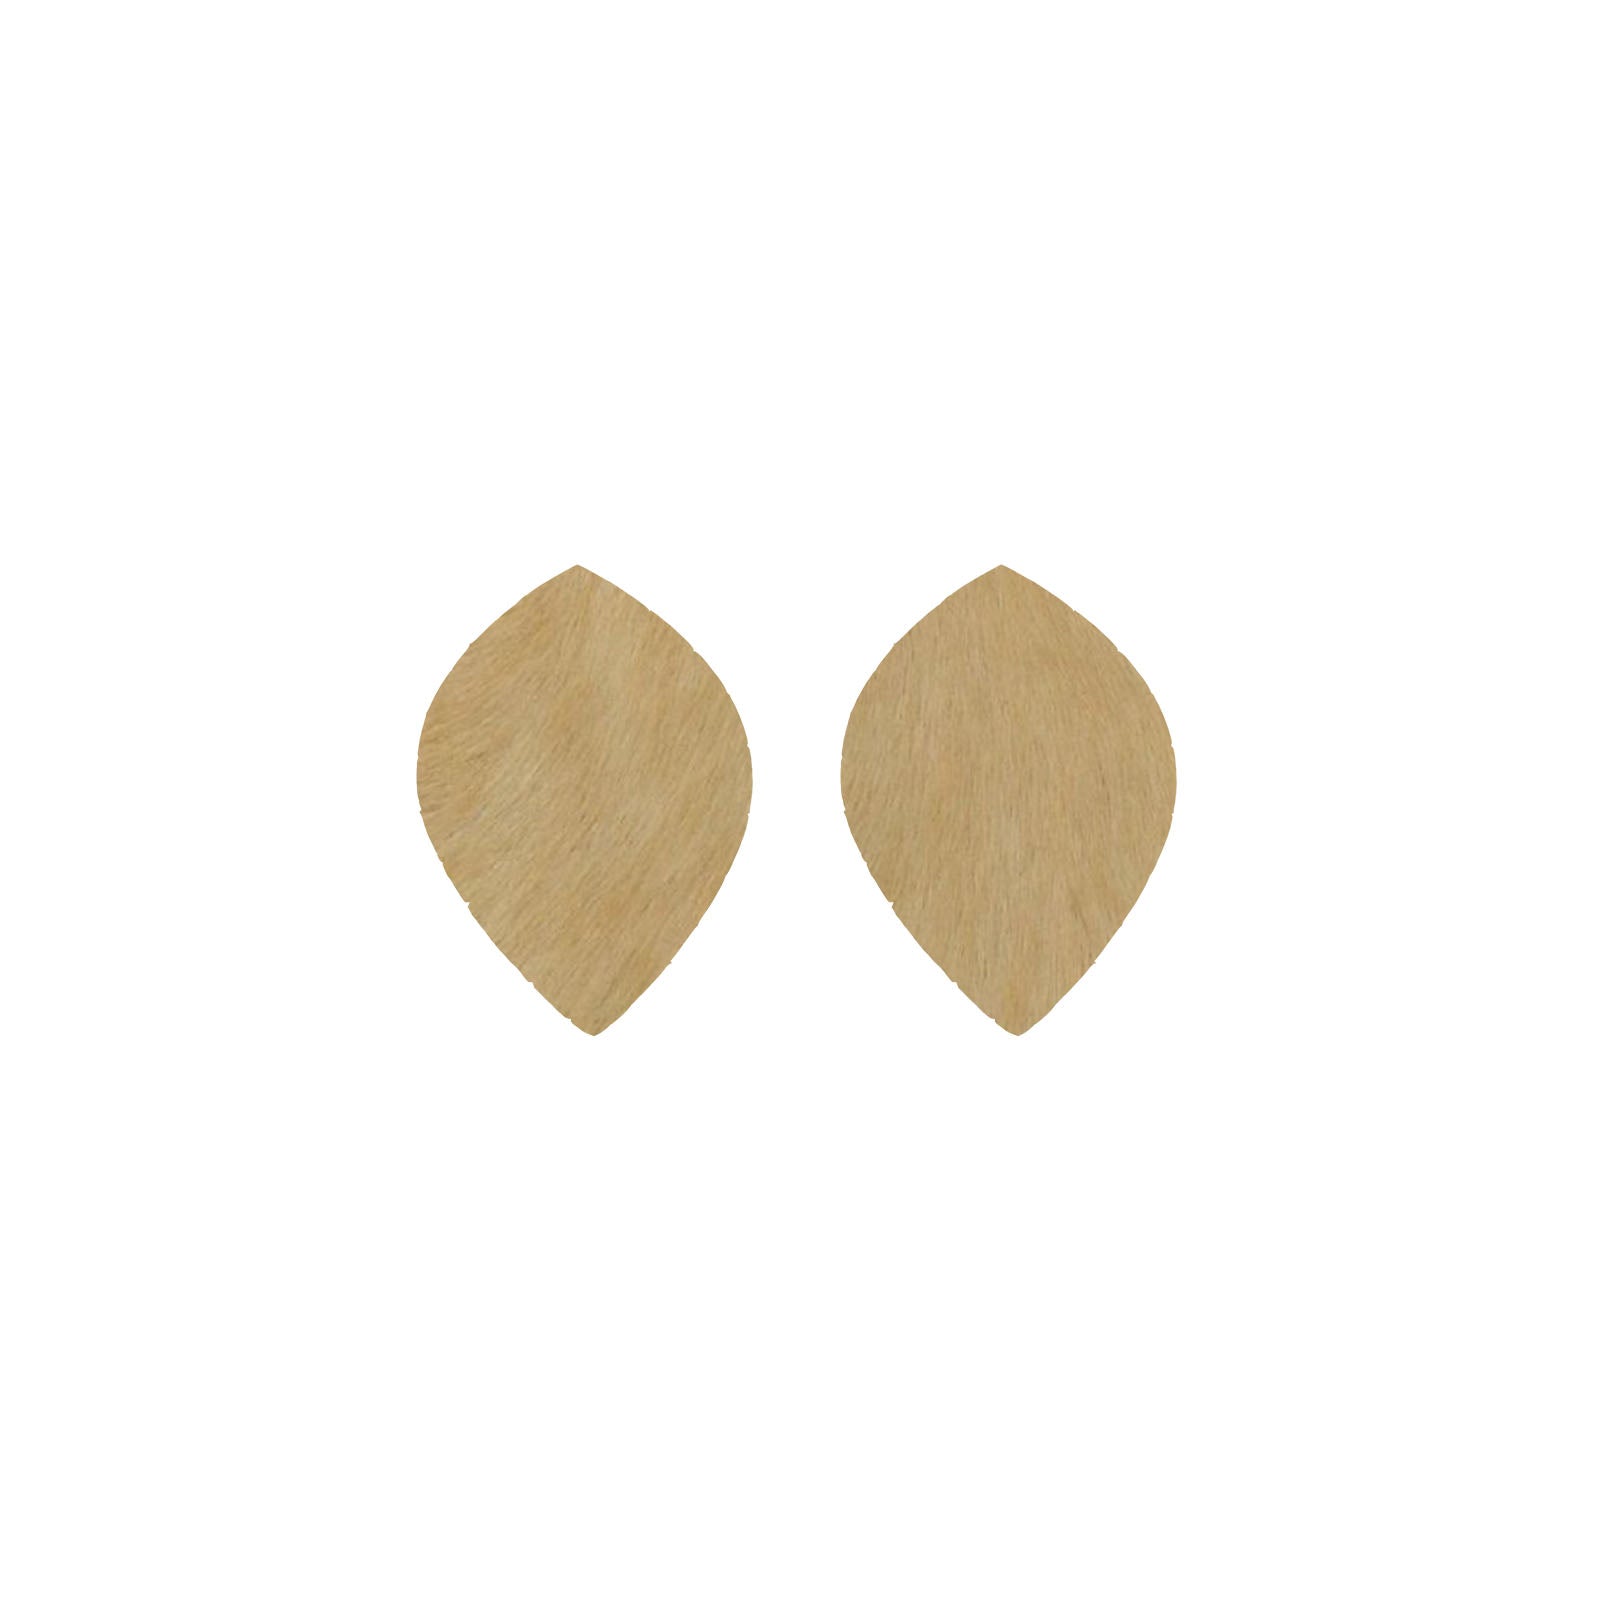 Solid Light Brown Hair On Die Cut Earrings, Small Leaf | The Leather Guy